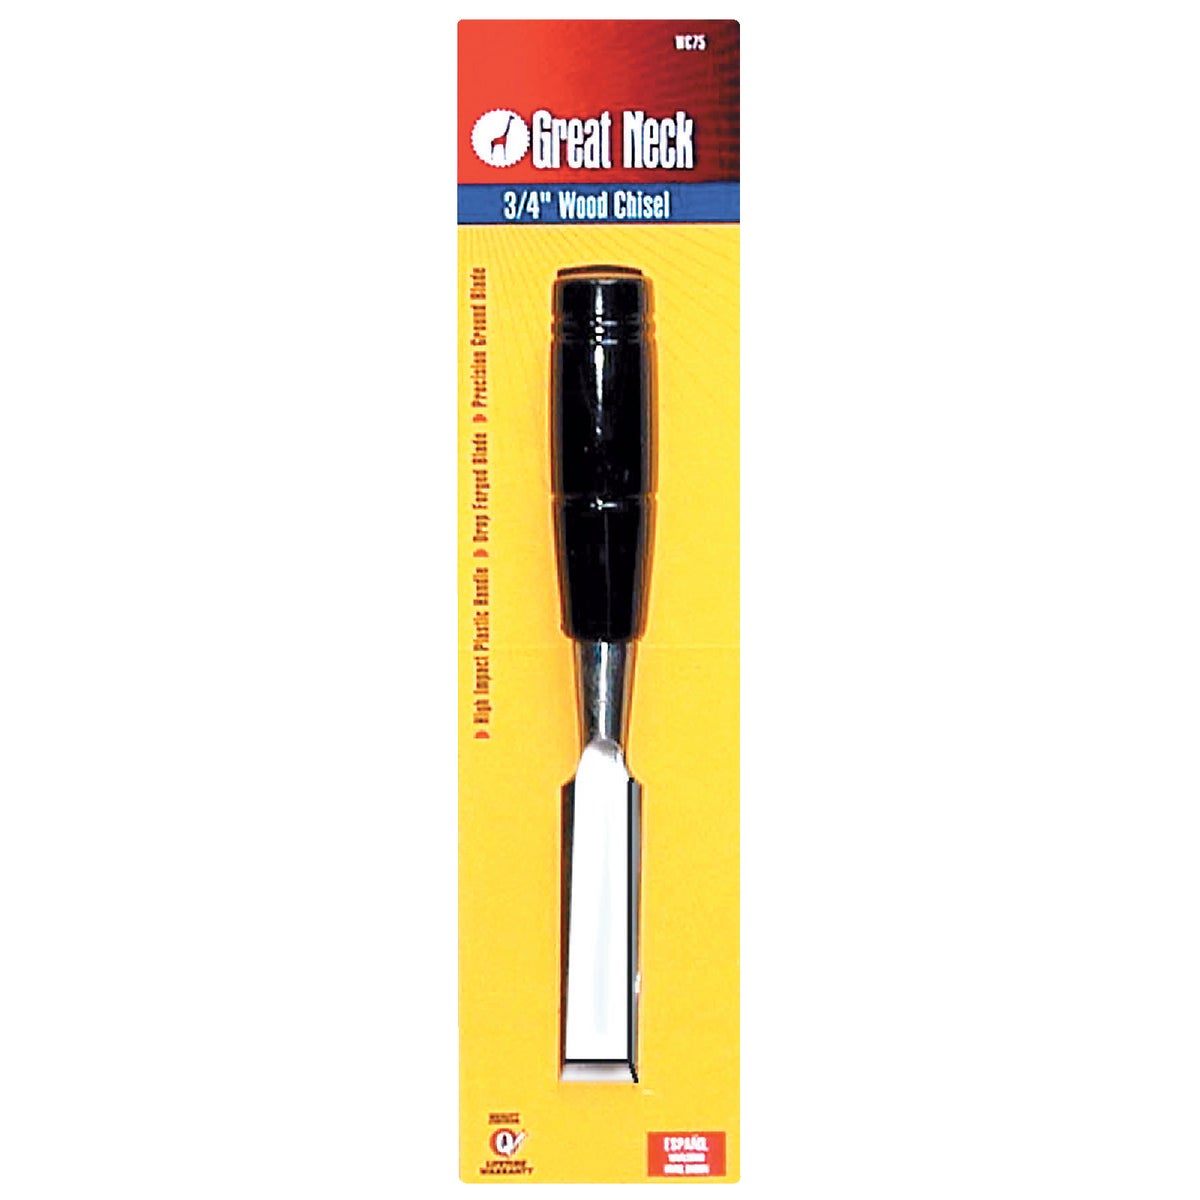 Wood Chisel, 3/4-in Blade